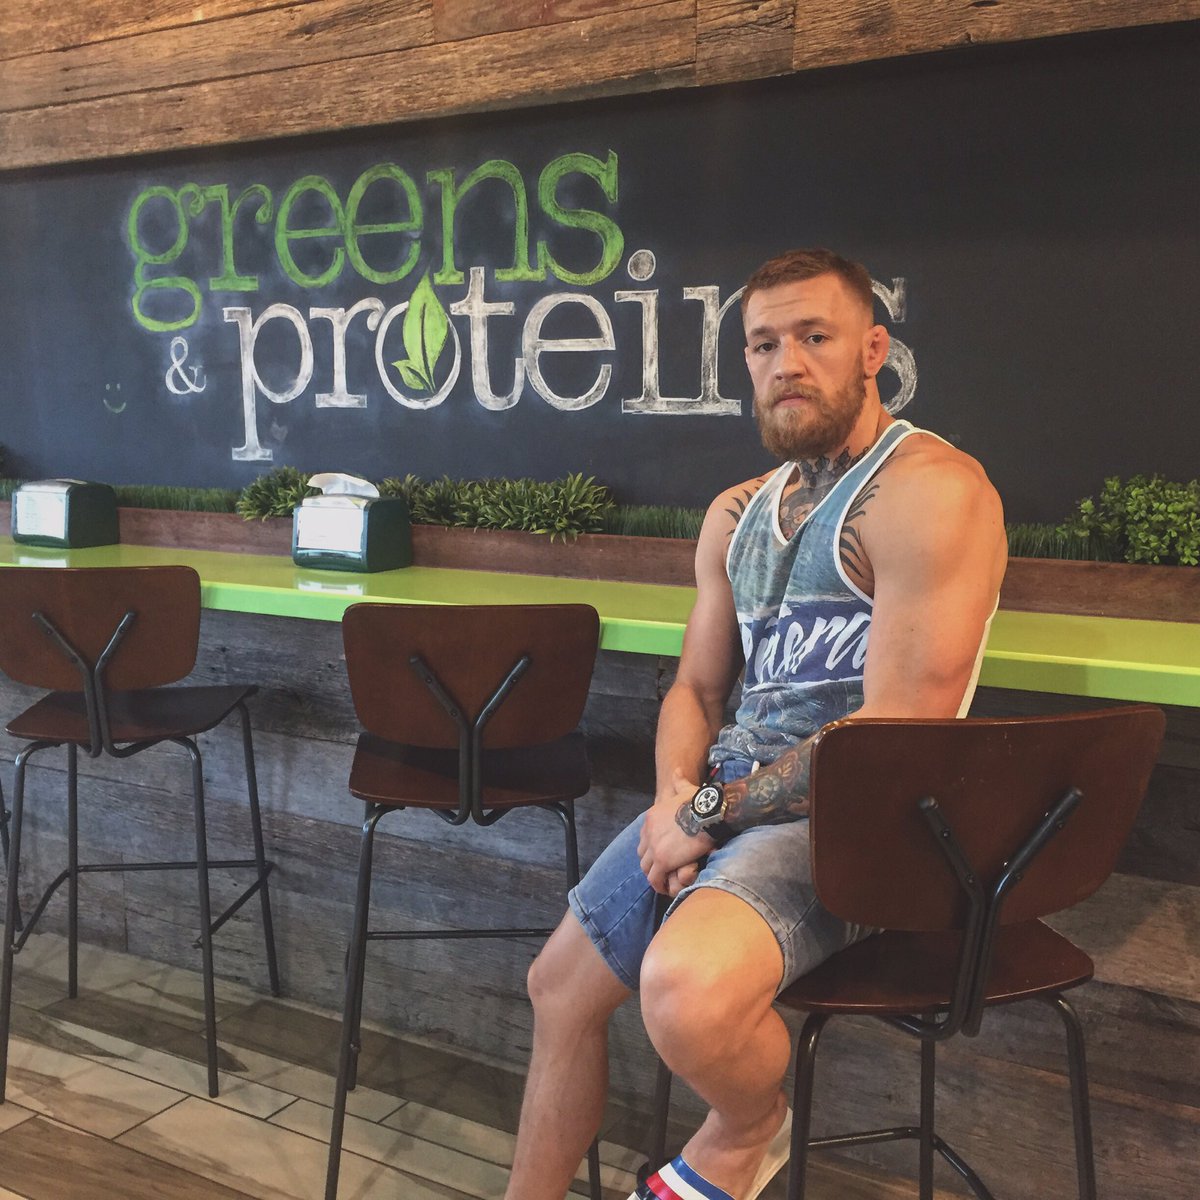 Eating at Greens and proteins. I'm an animal. https://t.co/fkrumlPfdH